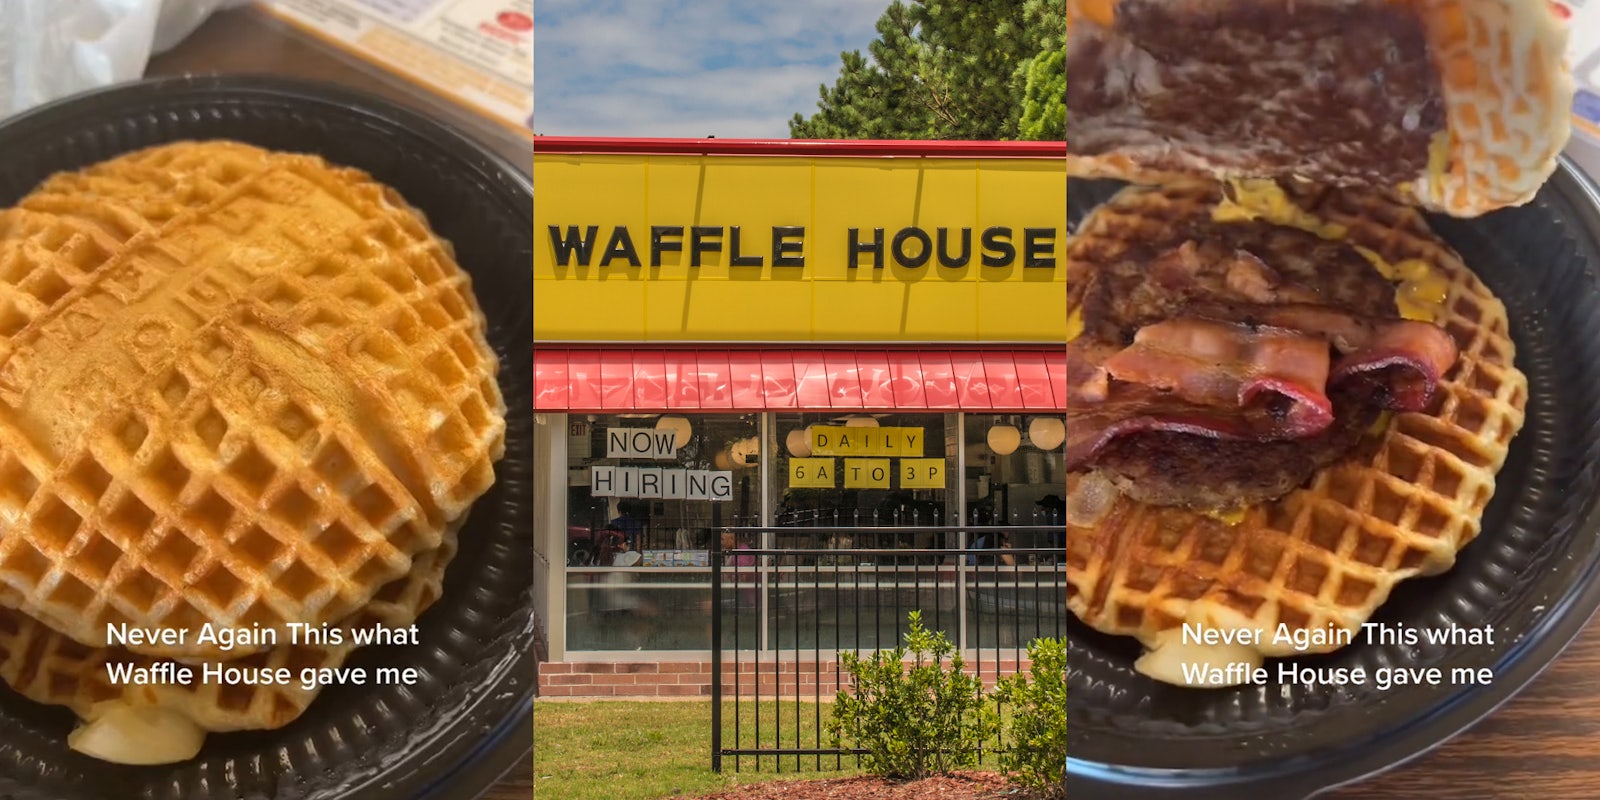 Waffle House sandwich in container with caption 'Never Again This what Waffle House gave me' (l) Waffle House building with sign (c) Waffle House sandwich in container with caption 'Never Again This what Waffle House gave me' (r)